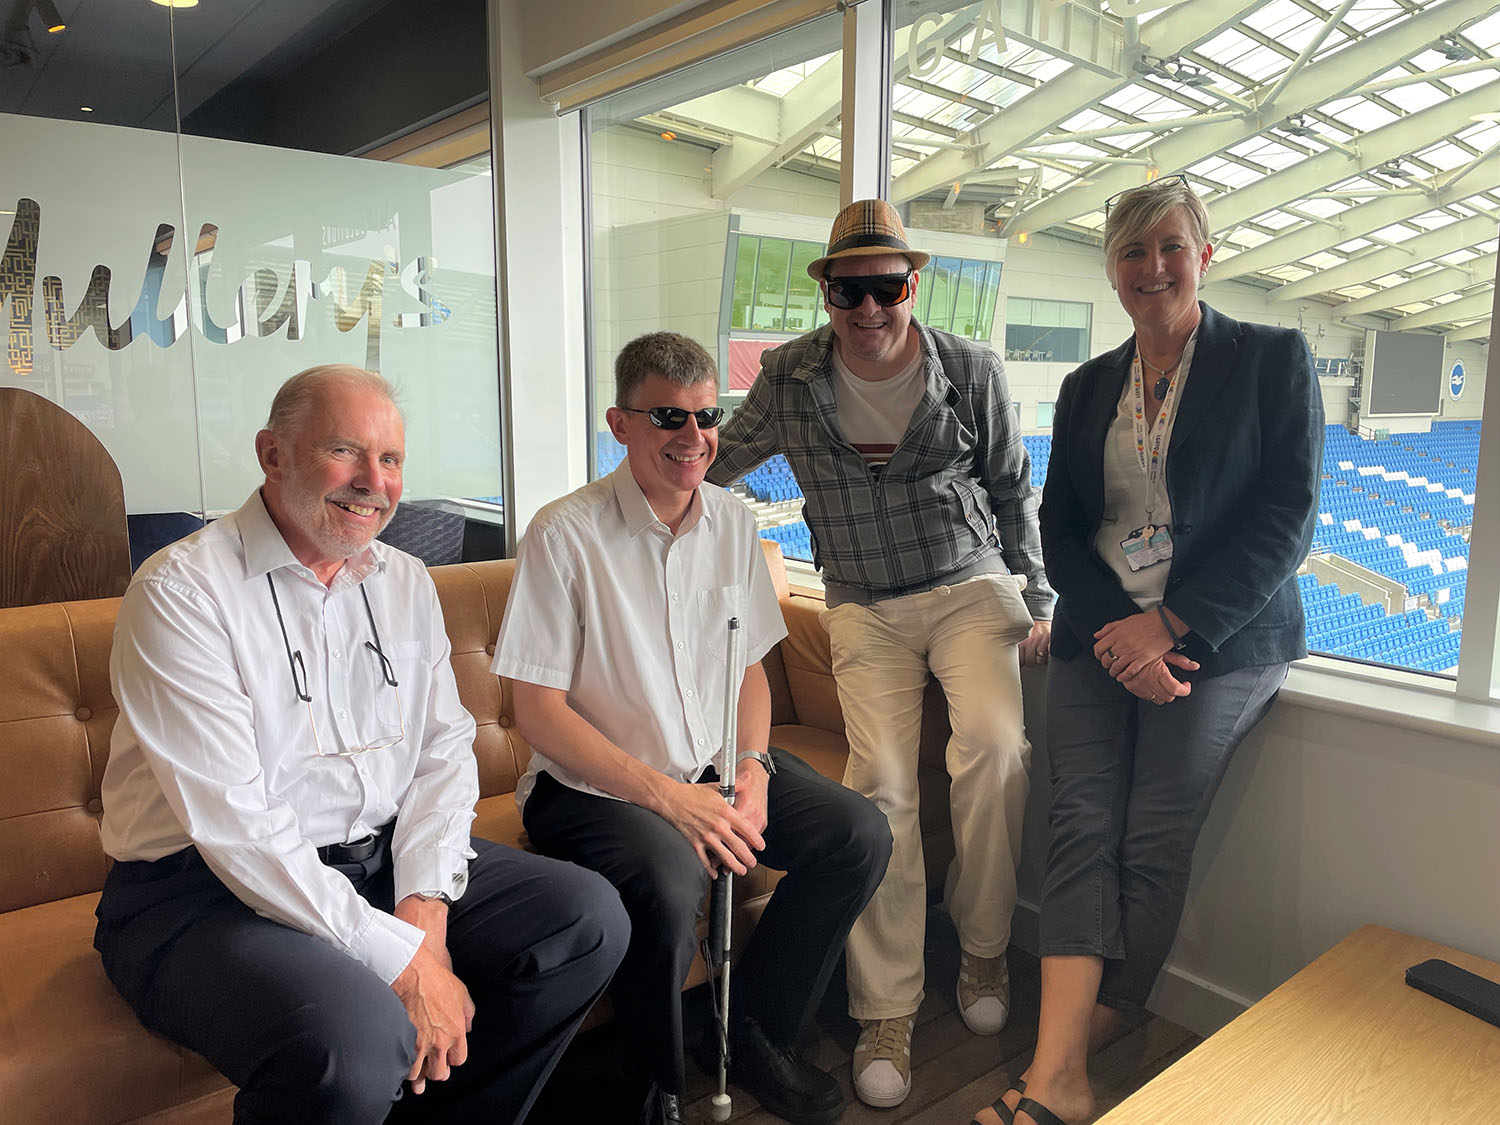 Left to right: Ian Palmer (BPS guest), Dave Smith, Paul Goddard and Shanni Collins from the Healthy Lifestyles team at Brighton & Hove City Council sitting by a window with the football stadium in the background. 